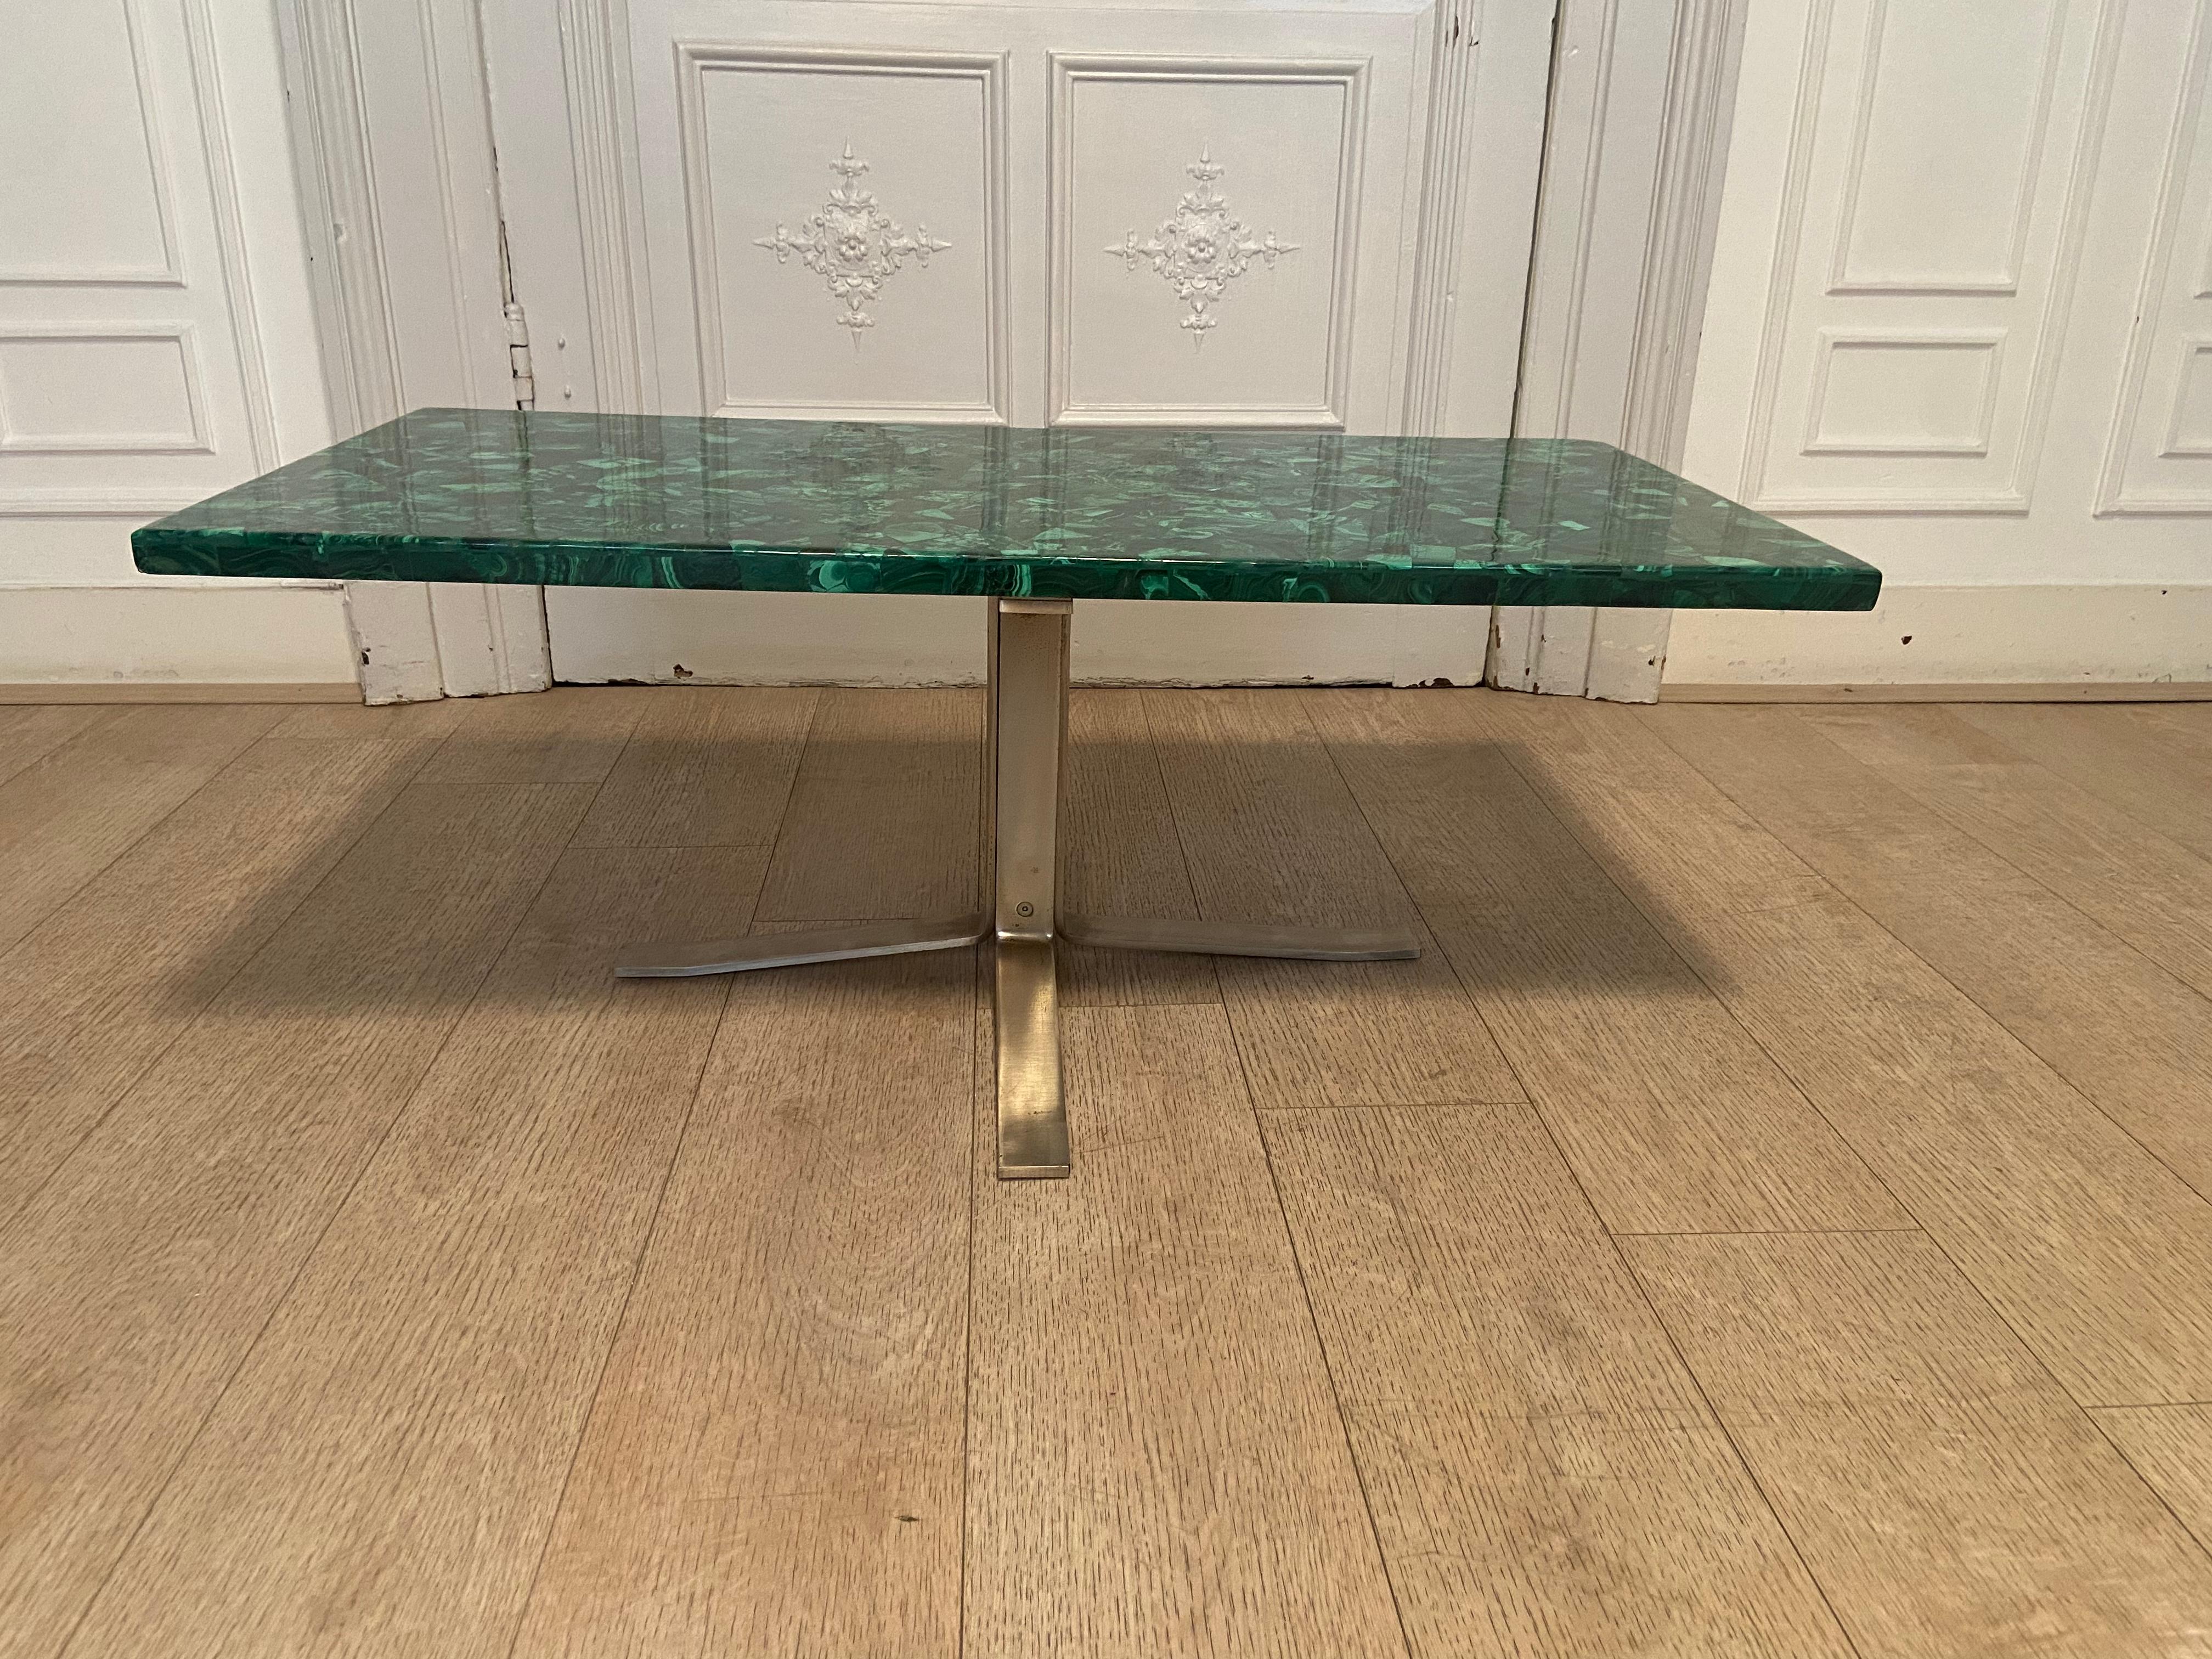 Malachite coffee table produced in the 70s. Good vintage condition, some very superficial scratches.